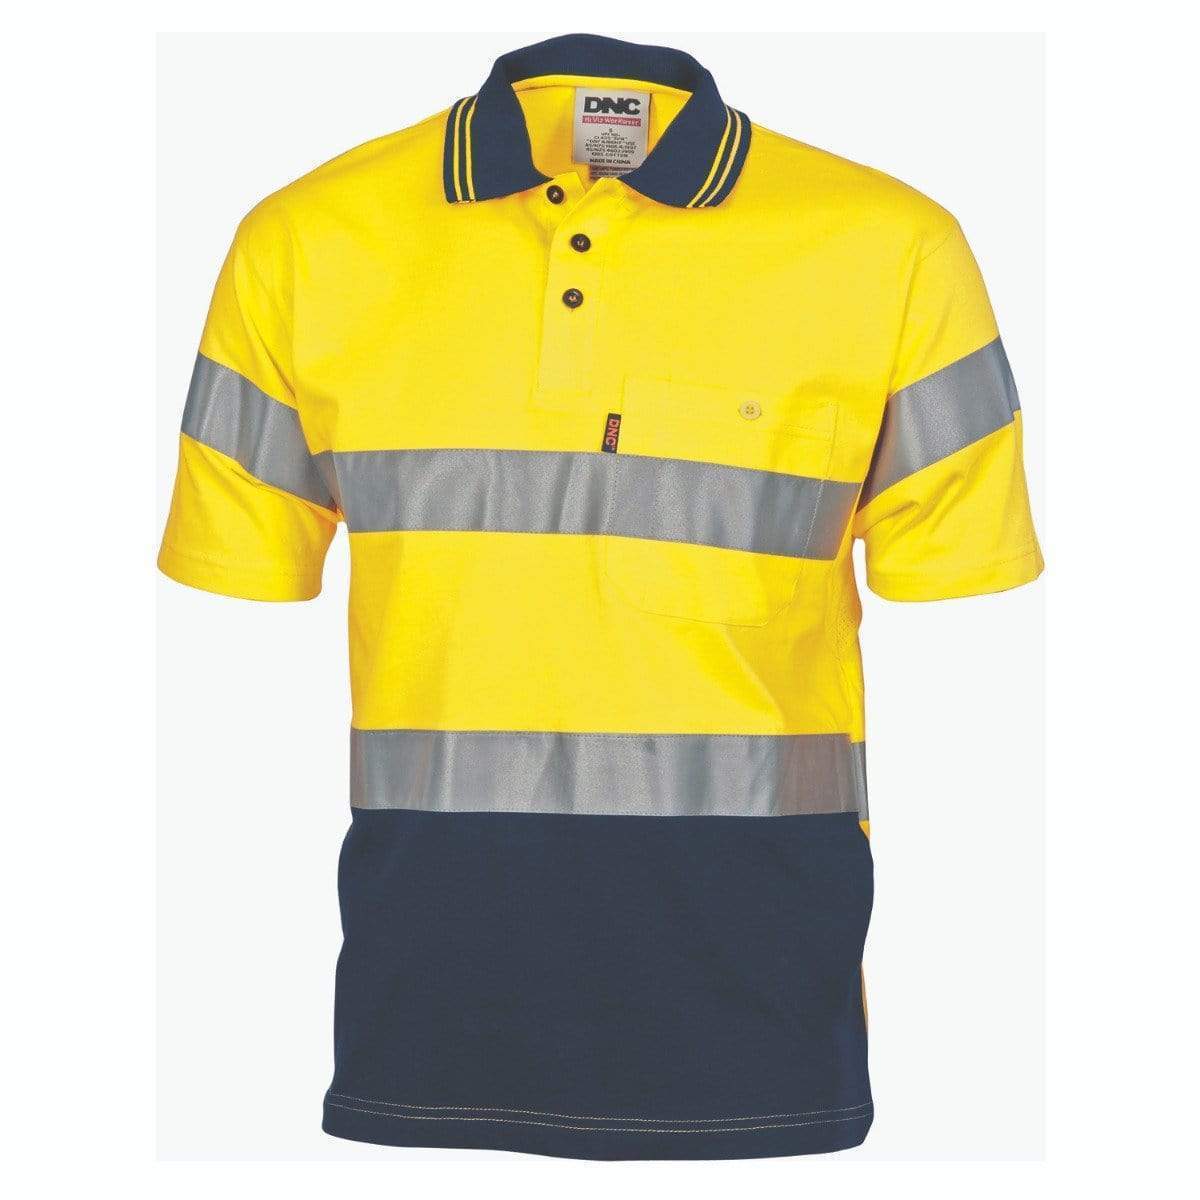 Dnc Workwear Hi-vis Cool-breeze Cotton Jersey Short Sleeve Polo With Csr Reflective Tape - 3915 Work Wear DNC Workwear Yellow/Navy S 